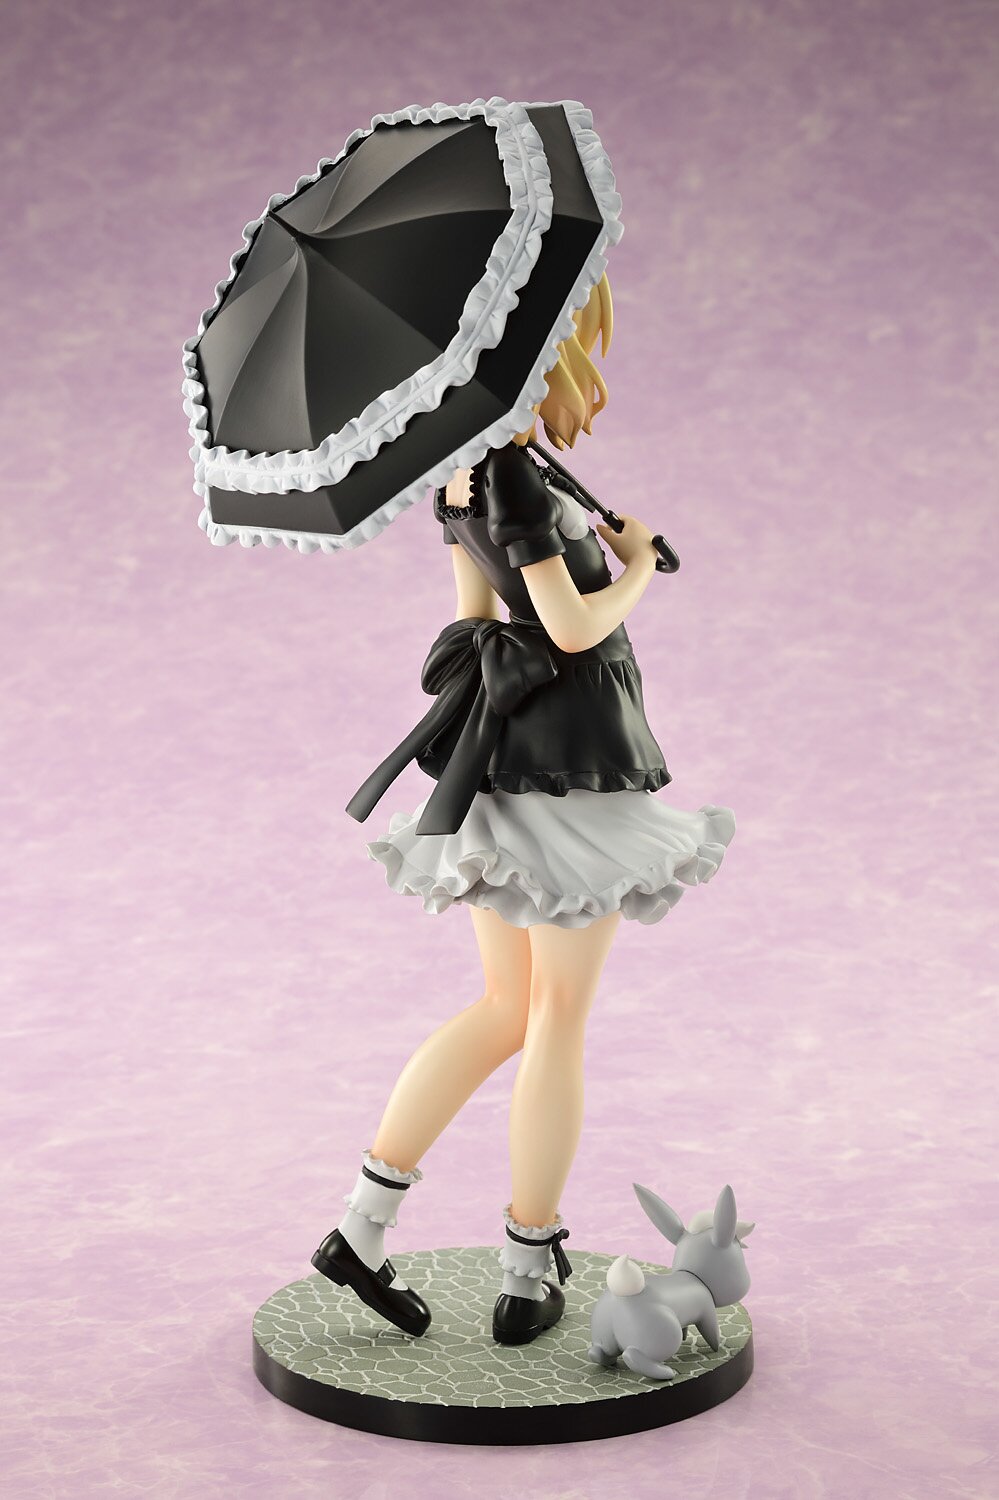 Is the Order a Rabbit? BLOOM Syaro (Gothic Lolita Ver.) 1/7 Scale Figure